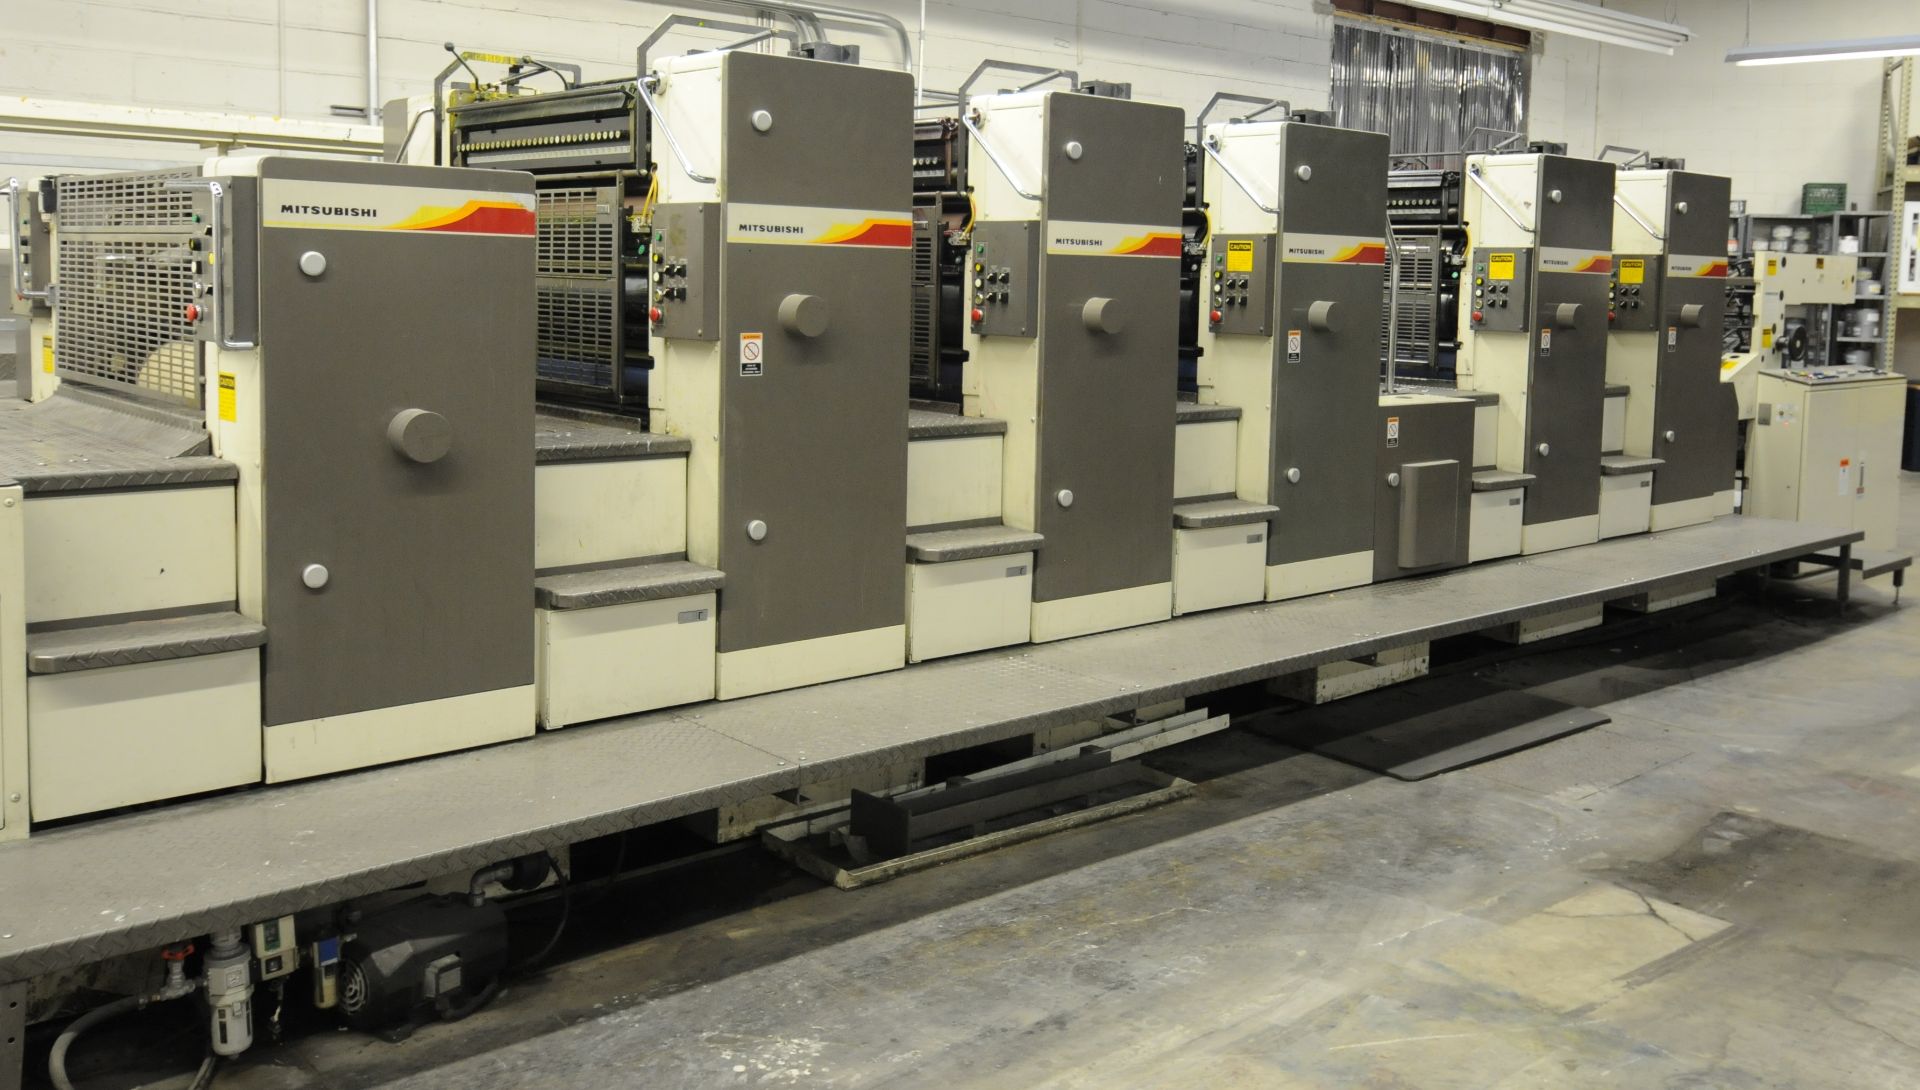 MITSUBISHI (2000) 3FR-5 (5) COLOR, 40"X28" SHEET-FEED OFFSET PERFECTOR PRESS WITH FULLY INTEGRATED - Image 8 of 13